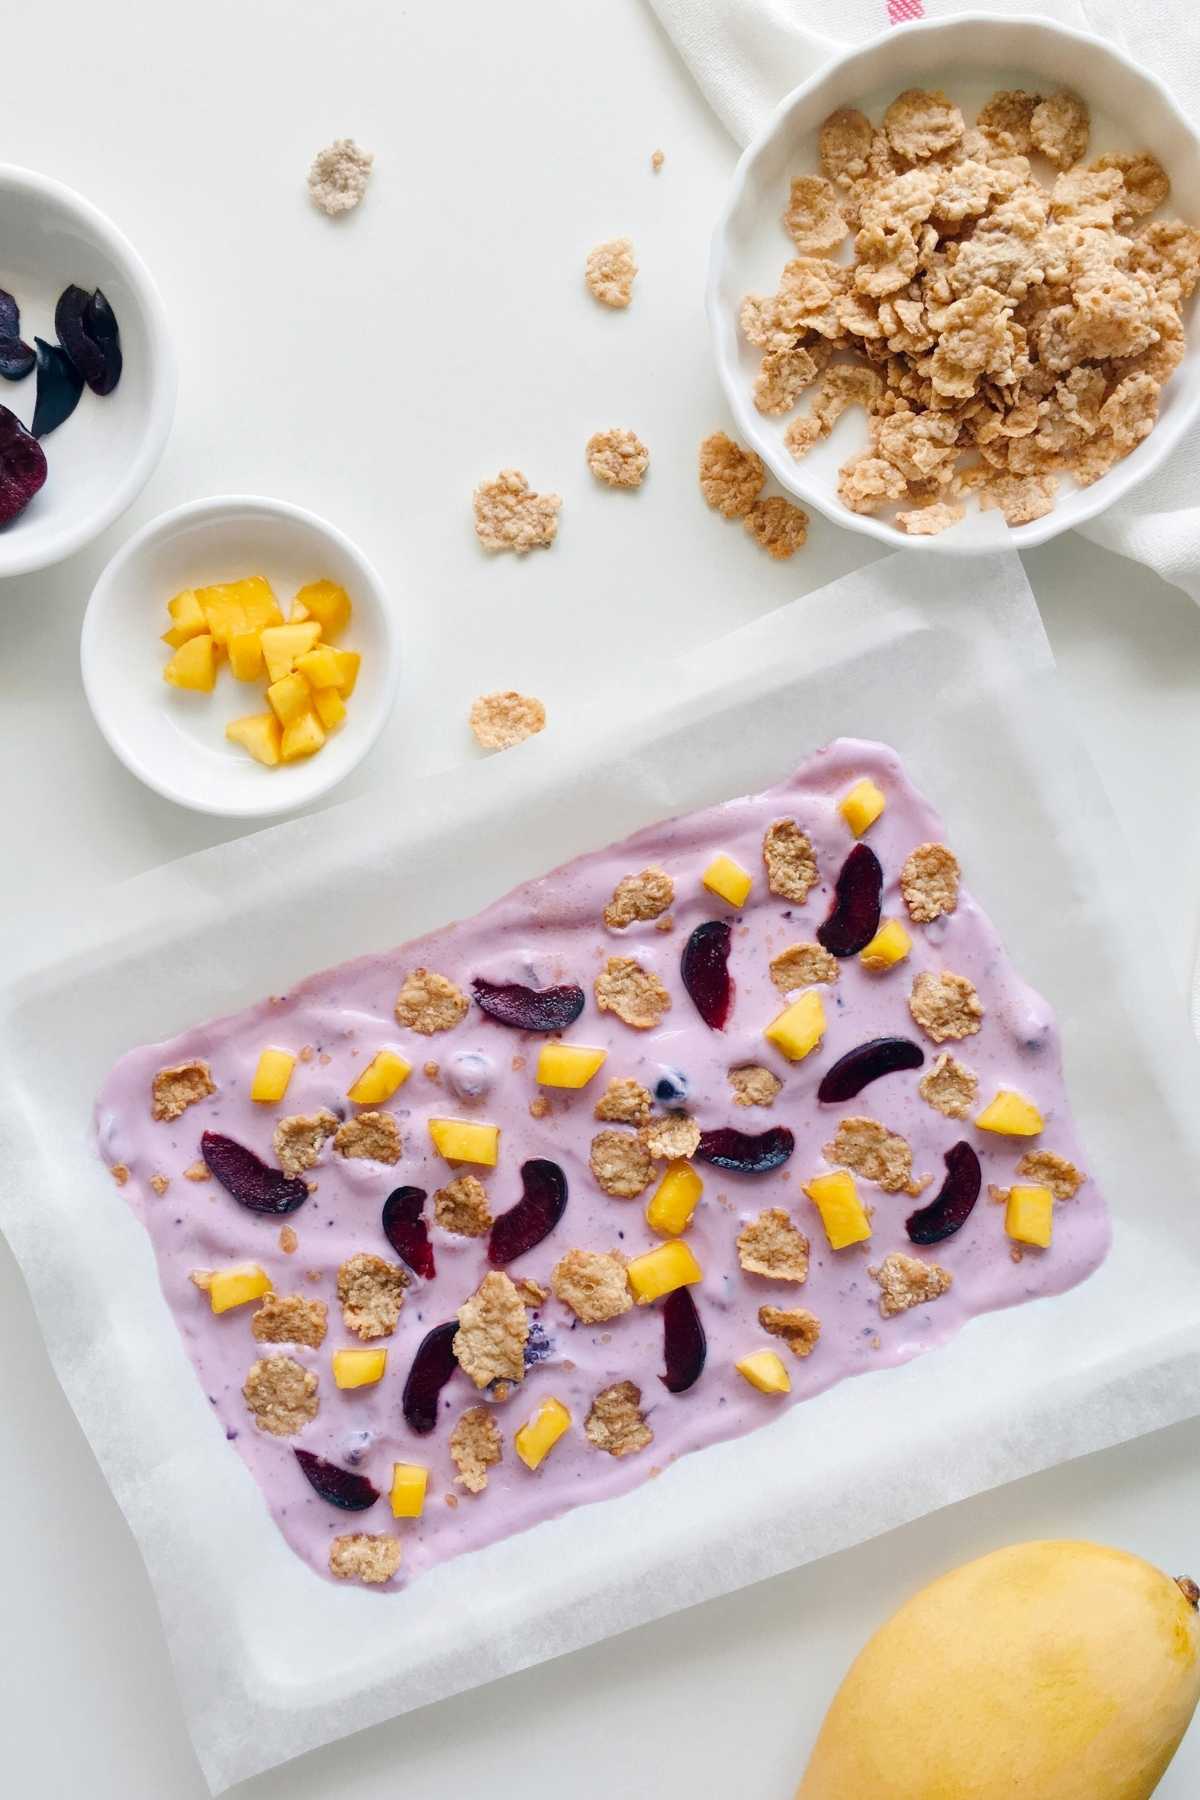 When it comes to fresh dairy products like yogurt, it isn’t always clear if it can be frozen. The good news is you can freeze fresh yogurt to extend its shelf life.